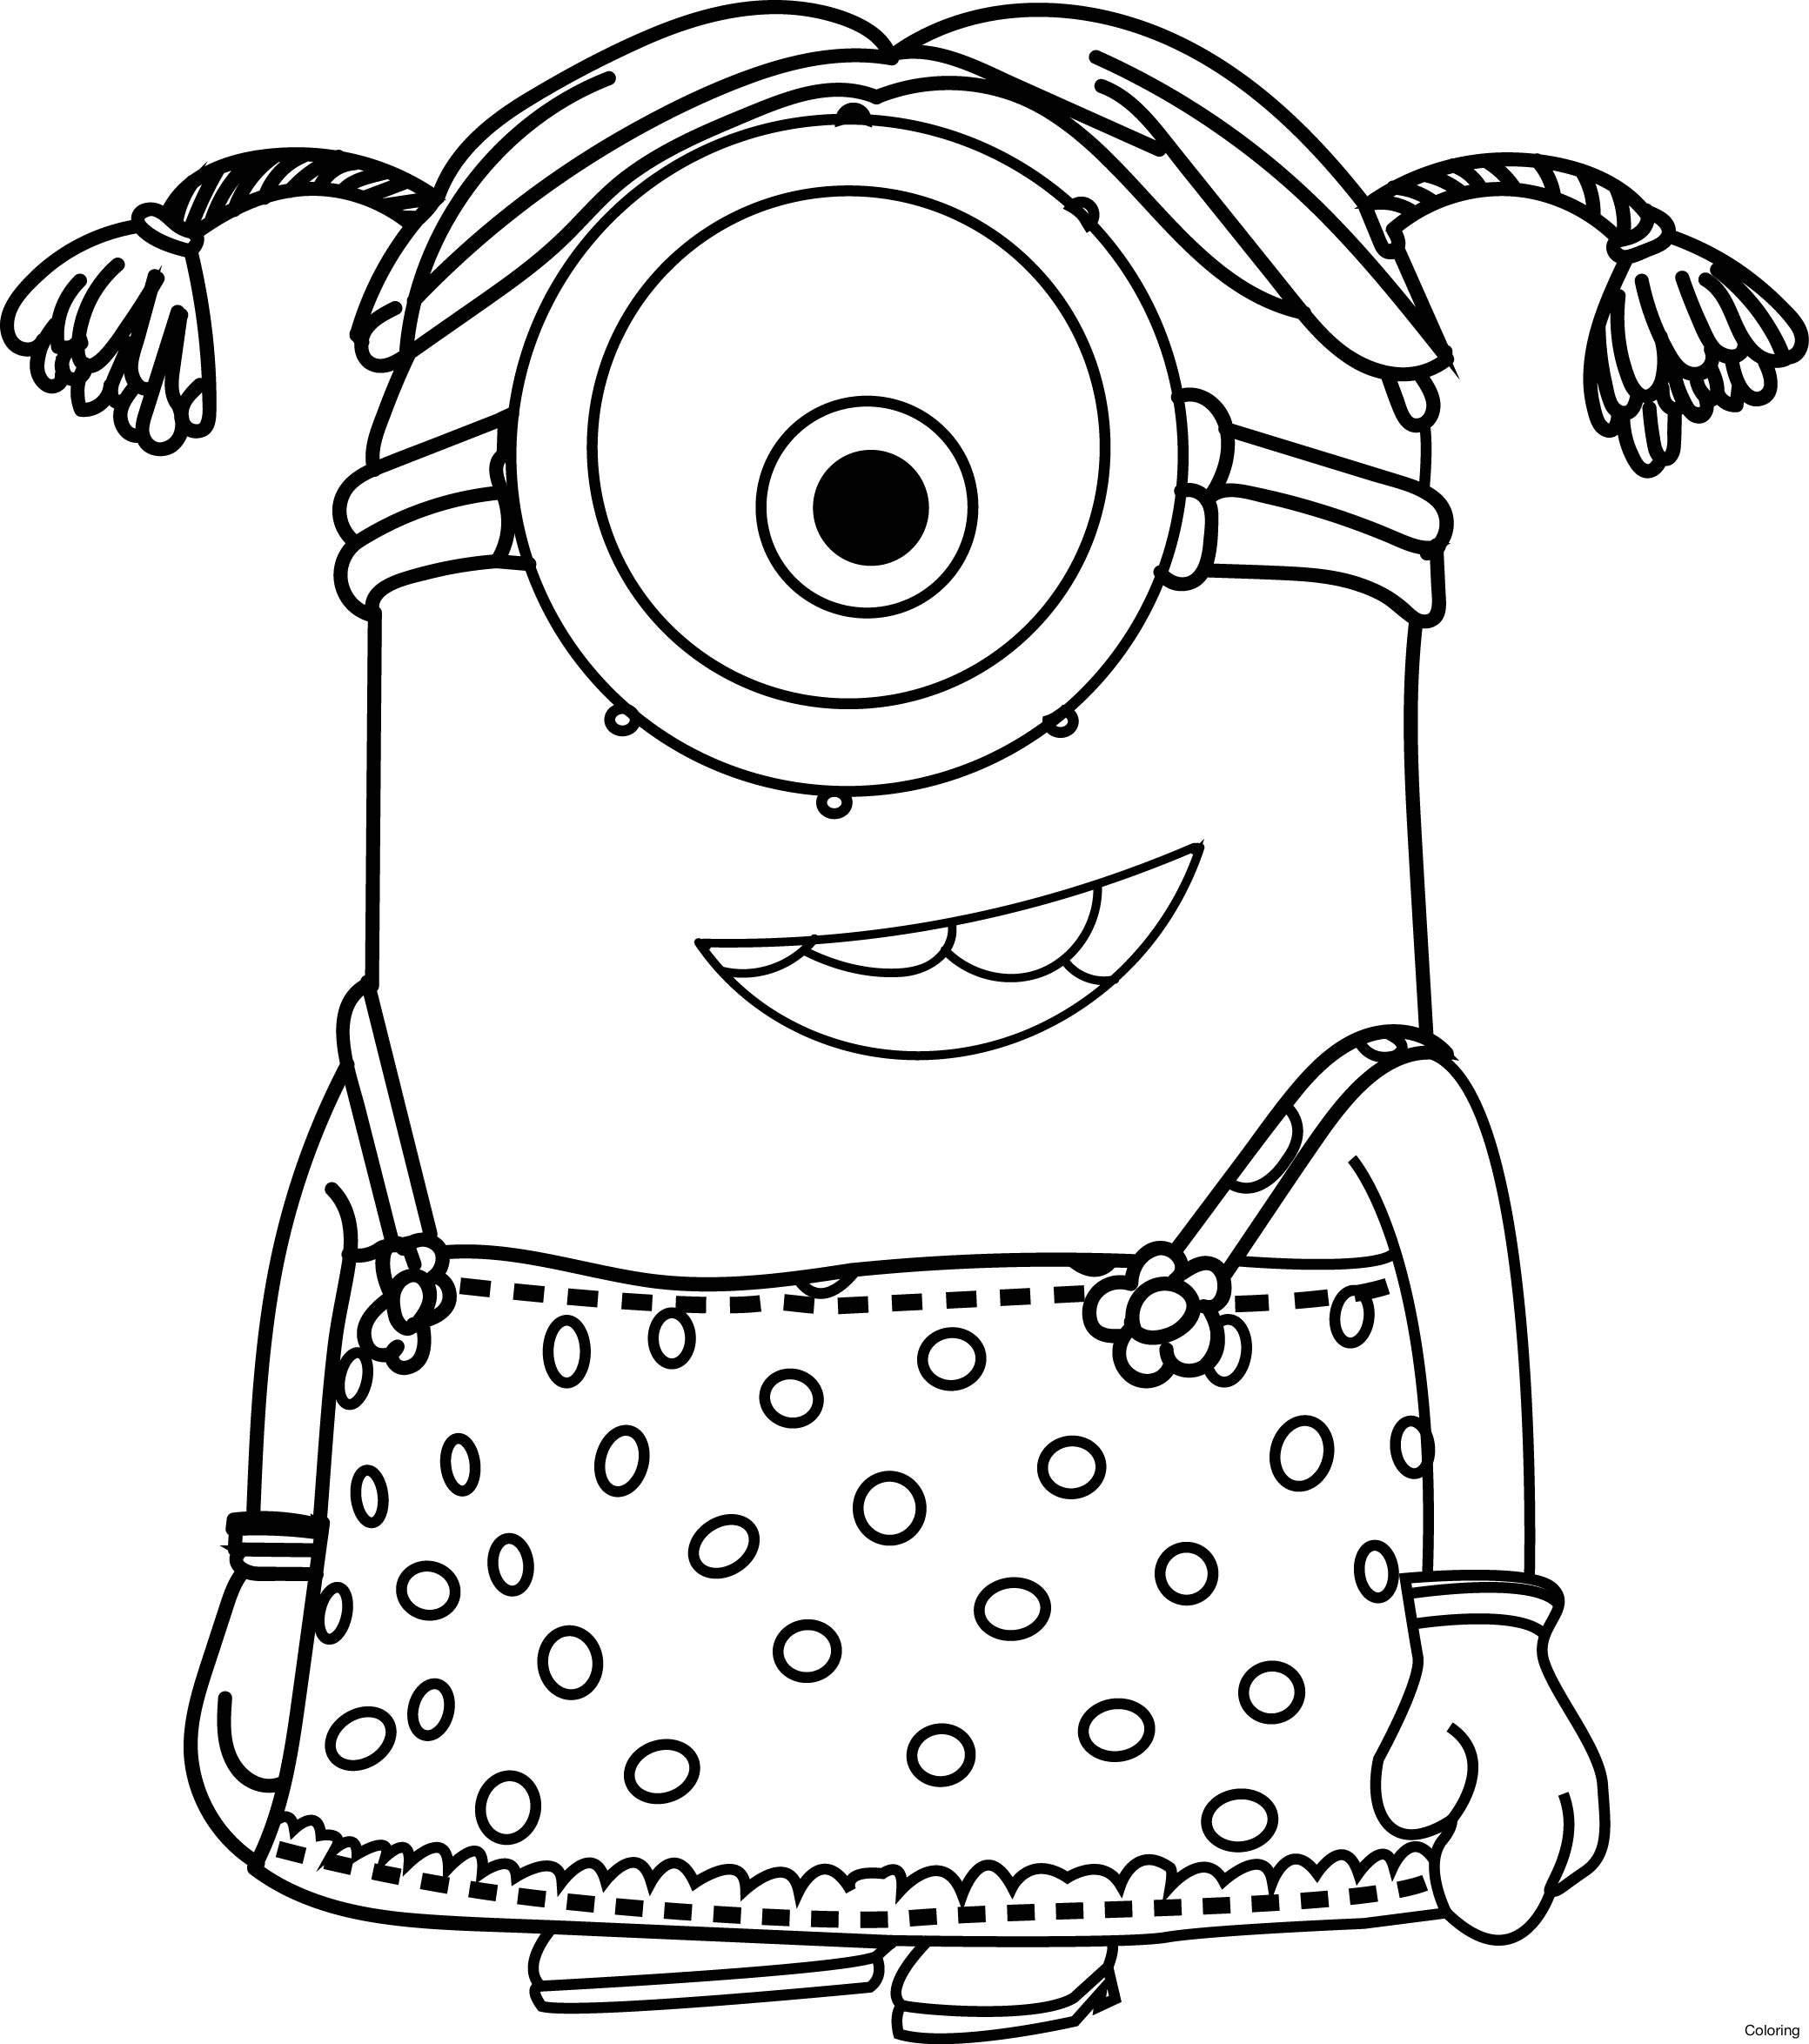 minion-coloring-pages-kevin-at-getcolorings-free-printable